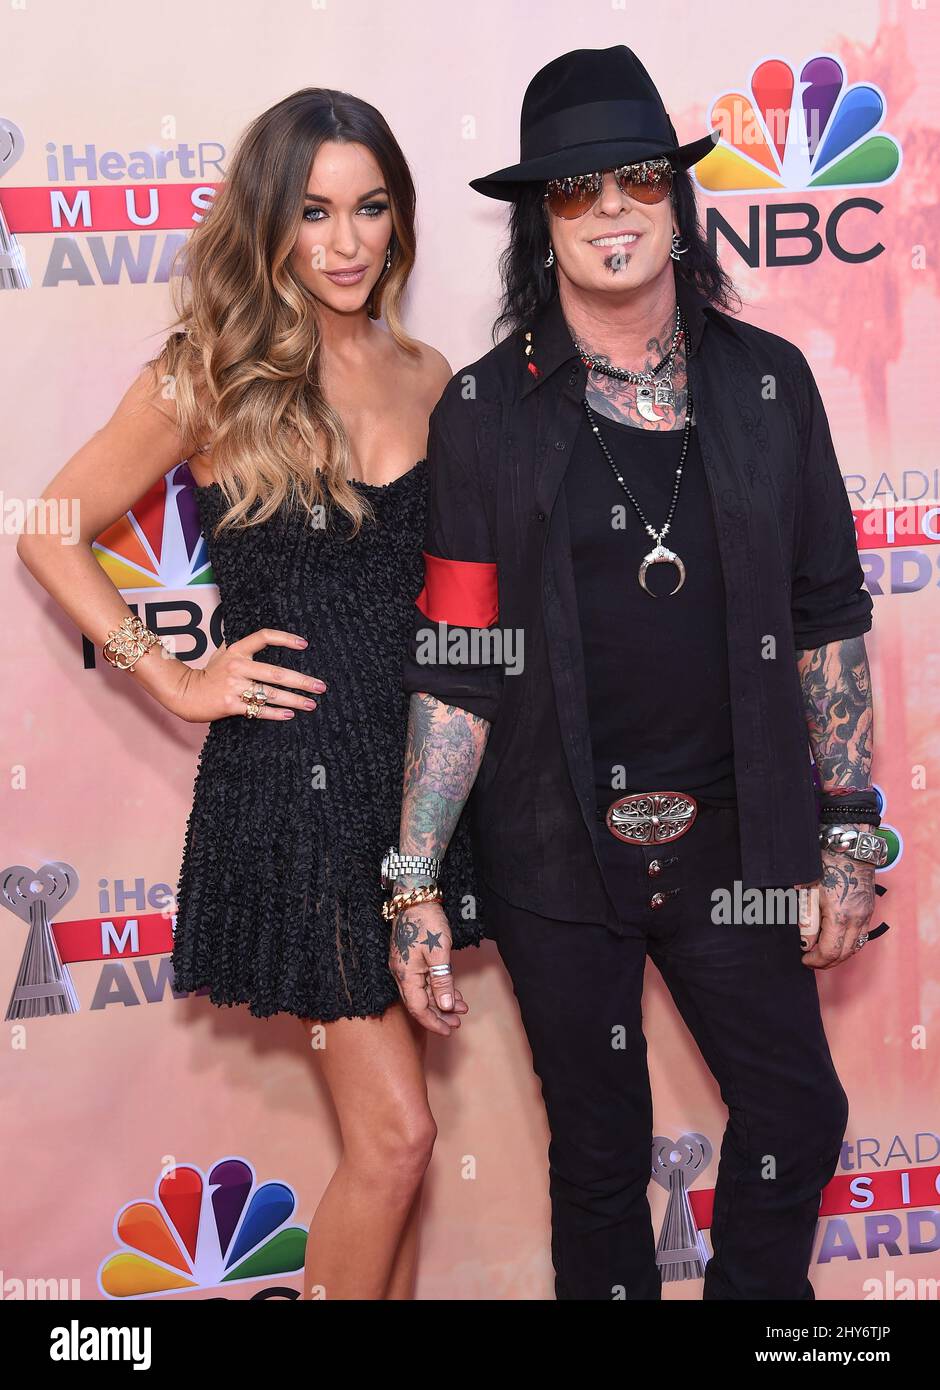 Nikki Sixx And Courtney Bingham Sixx Arriving At The 2015 Iheartradio Music Awards Held At The